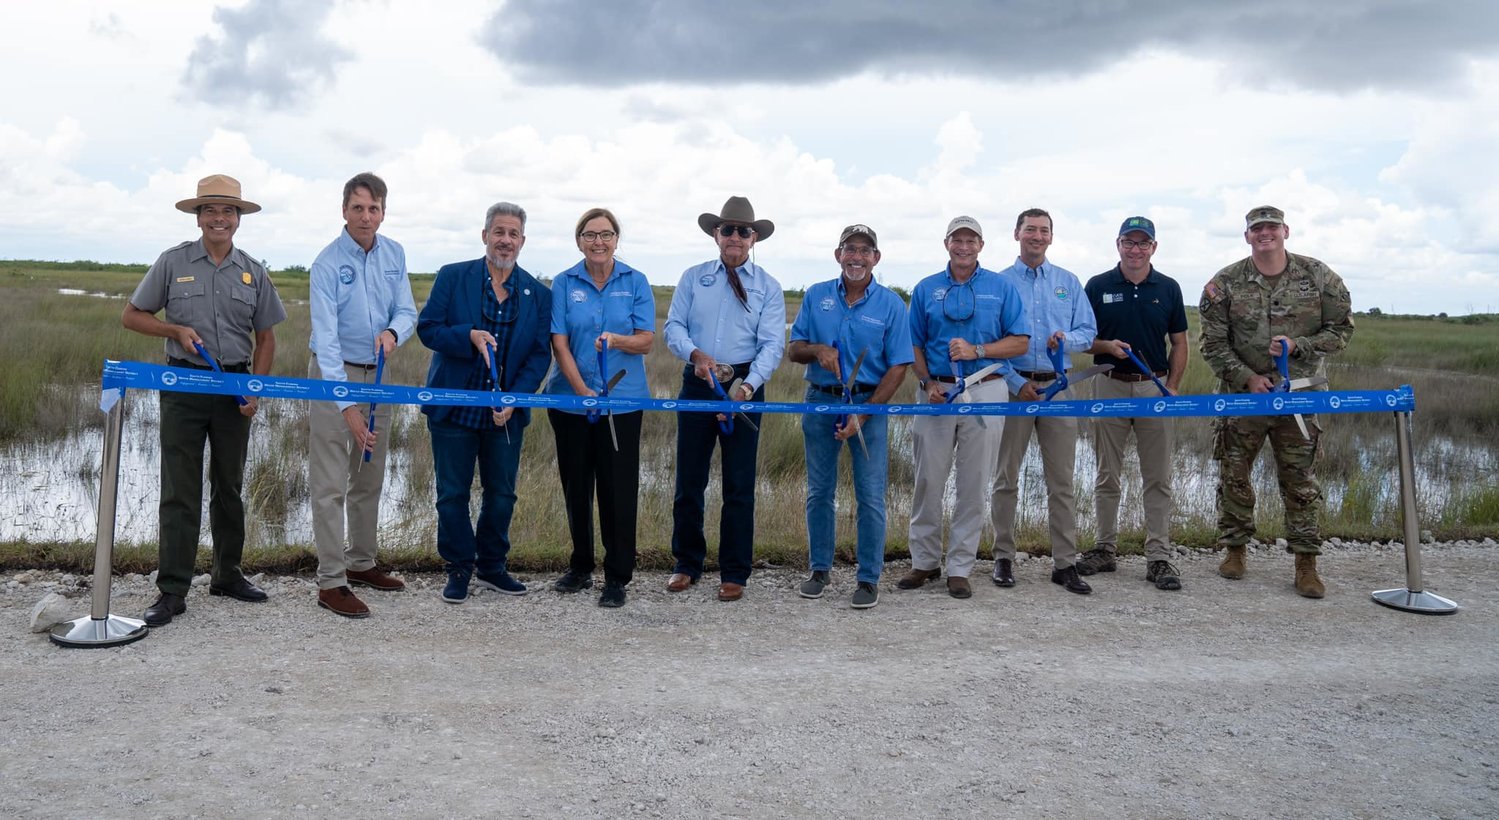 On Sept. 15, the ribbon cutting was held for the 8.5 square mile seepage wall to protect the developed area from seepage of water from Everglades National Park. [Photo courtesy SFWMD]